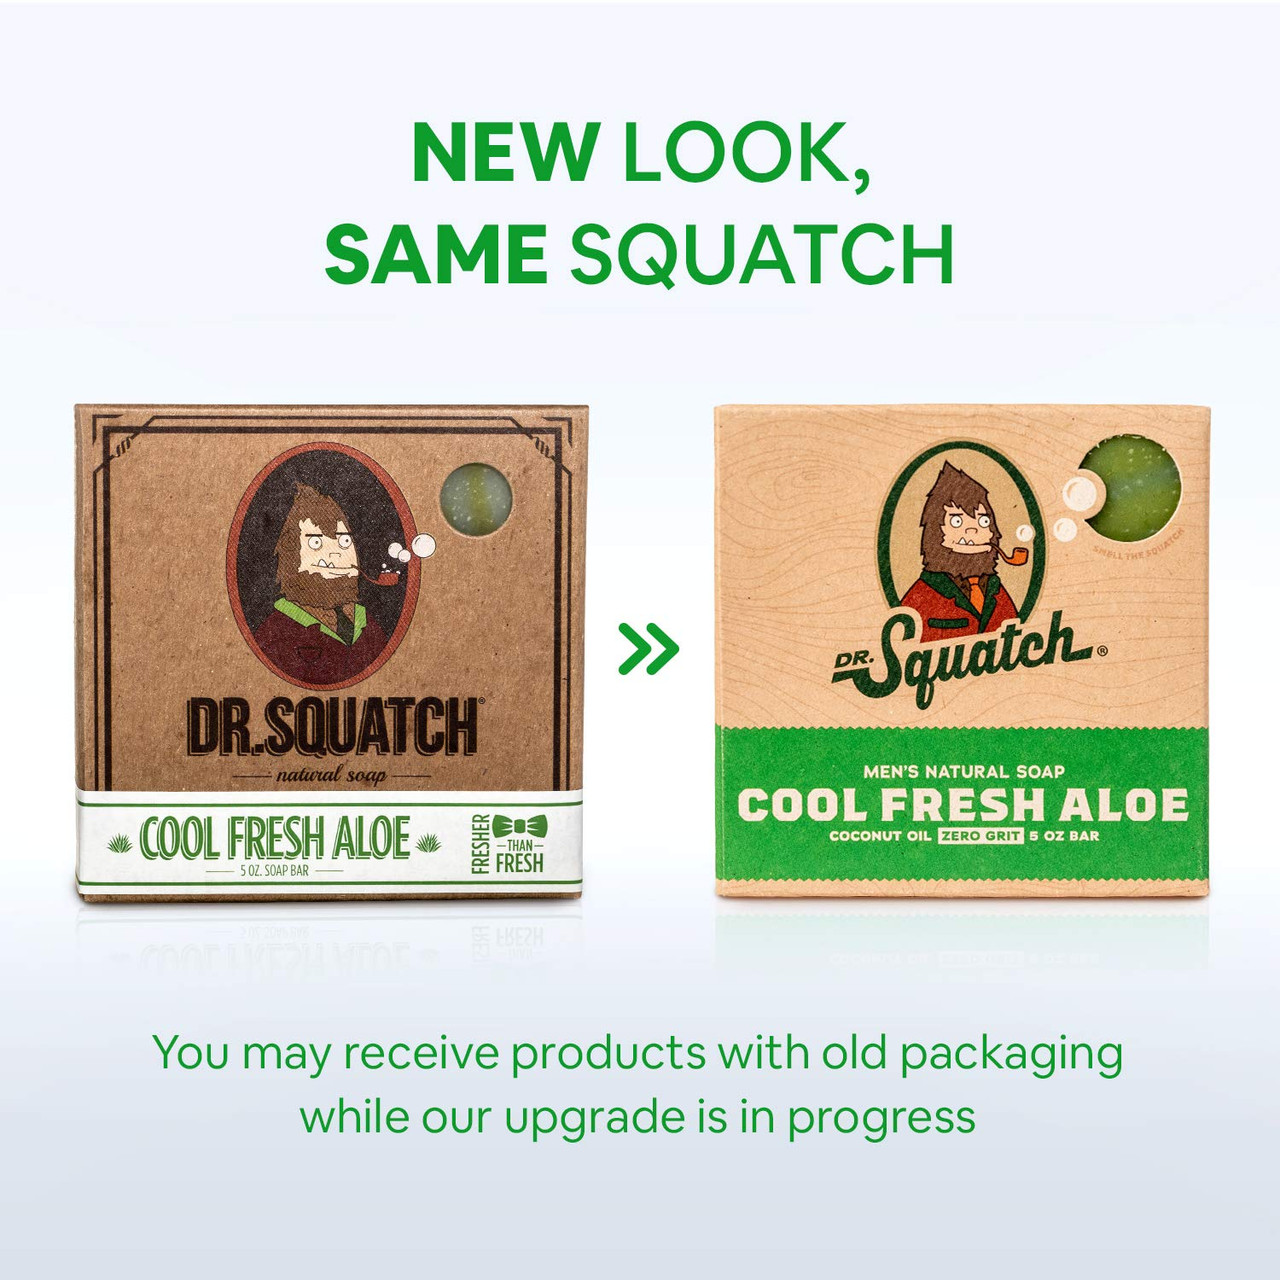 Dr. Squatch All Natural Bar Soap for Men with Zero Grit, Cool Fresh Aloe